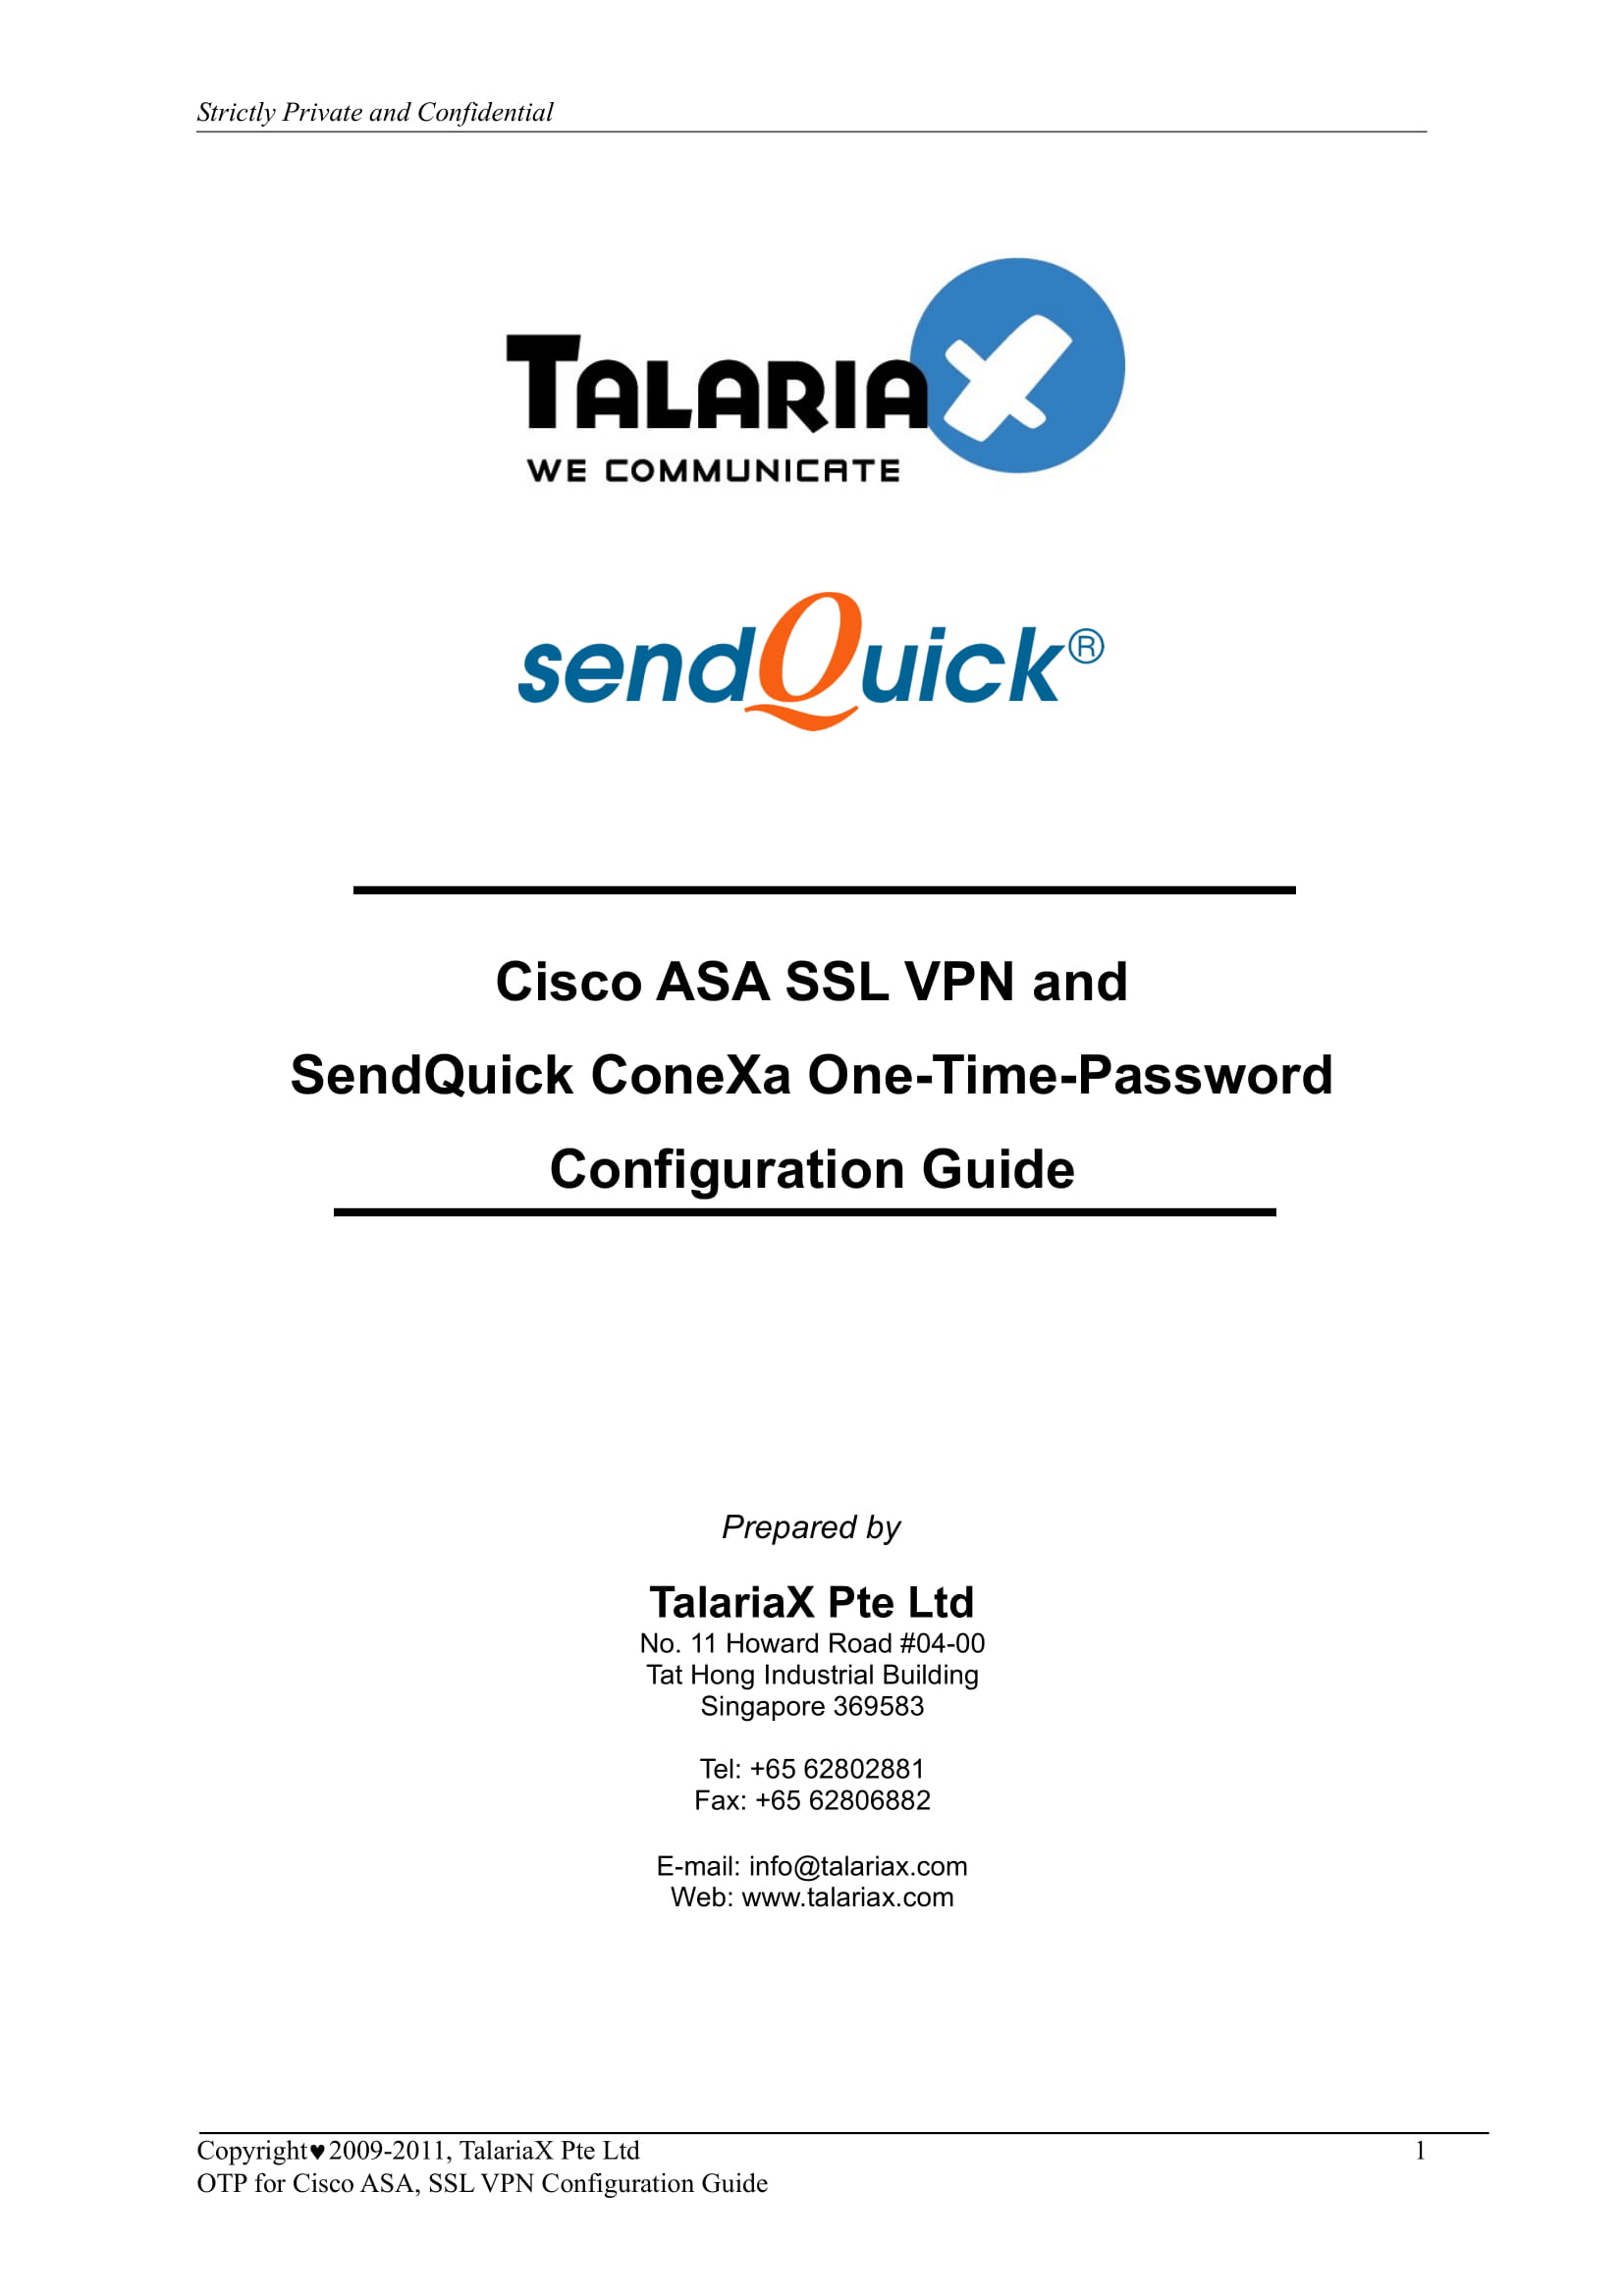 You are currently viewing Cisco ASA SSL VPN and SendQuick ConeXa One-Time-Password Configuration Guide